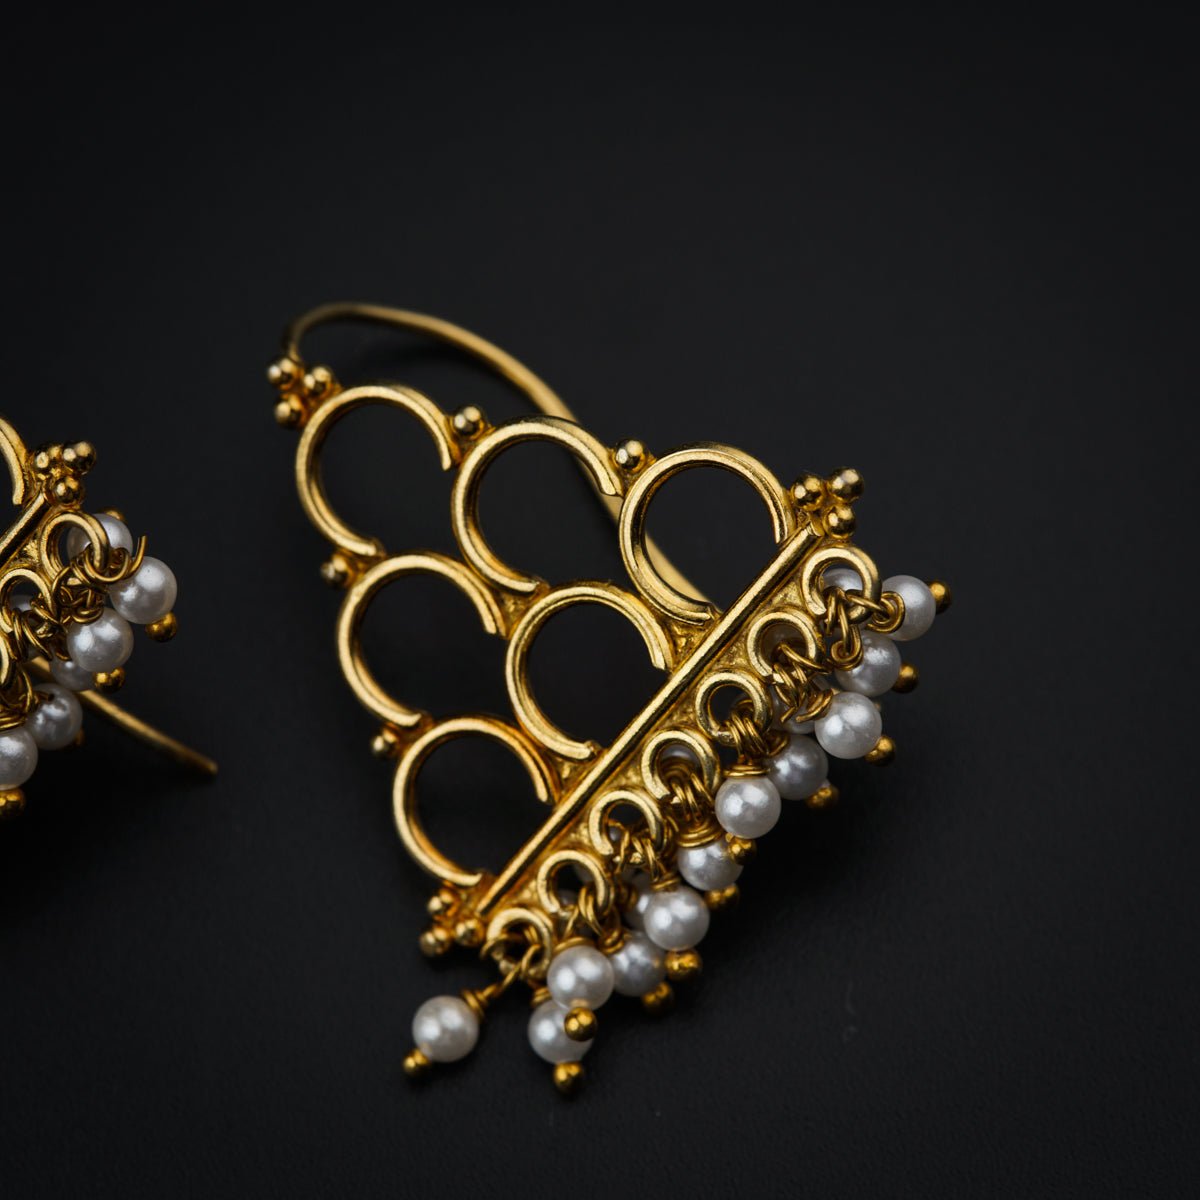 a pair of gold and pearl earrings on a black surface